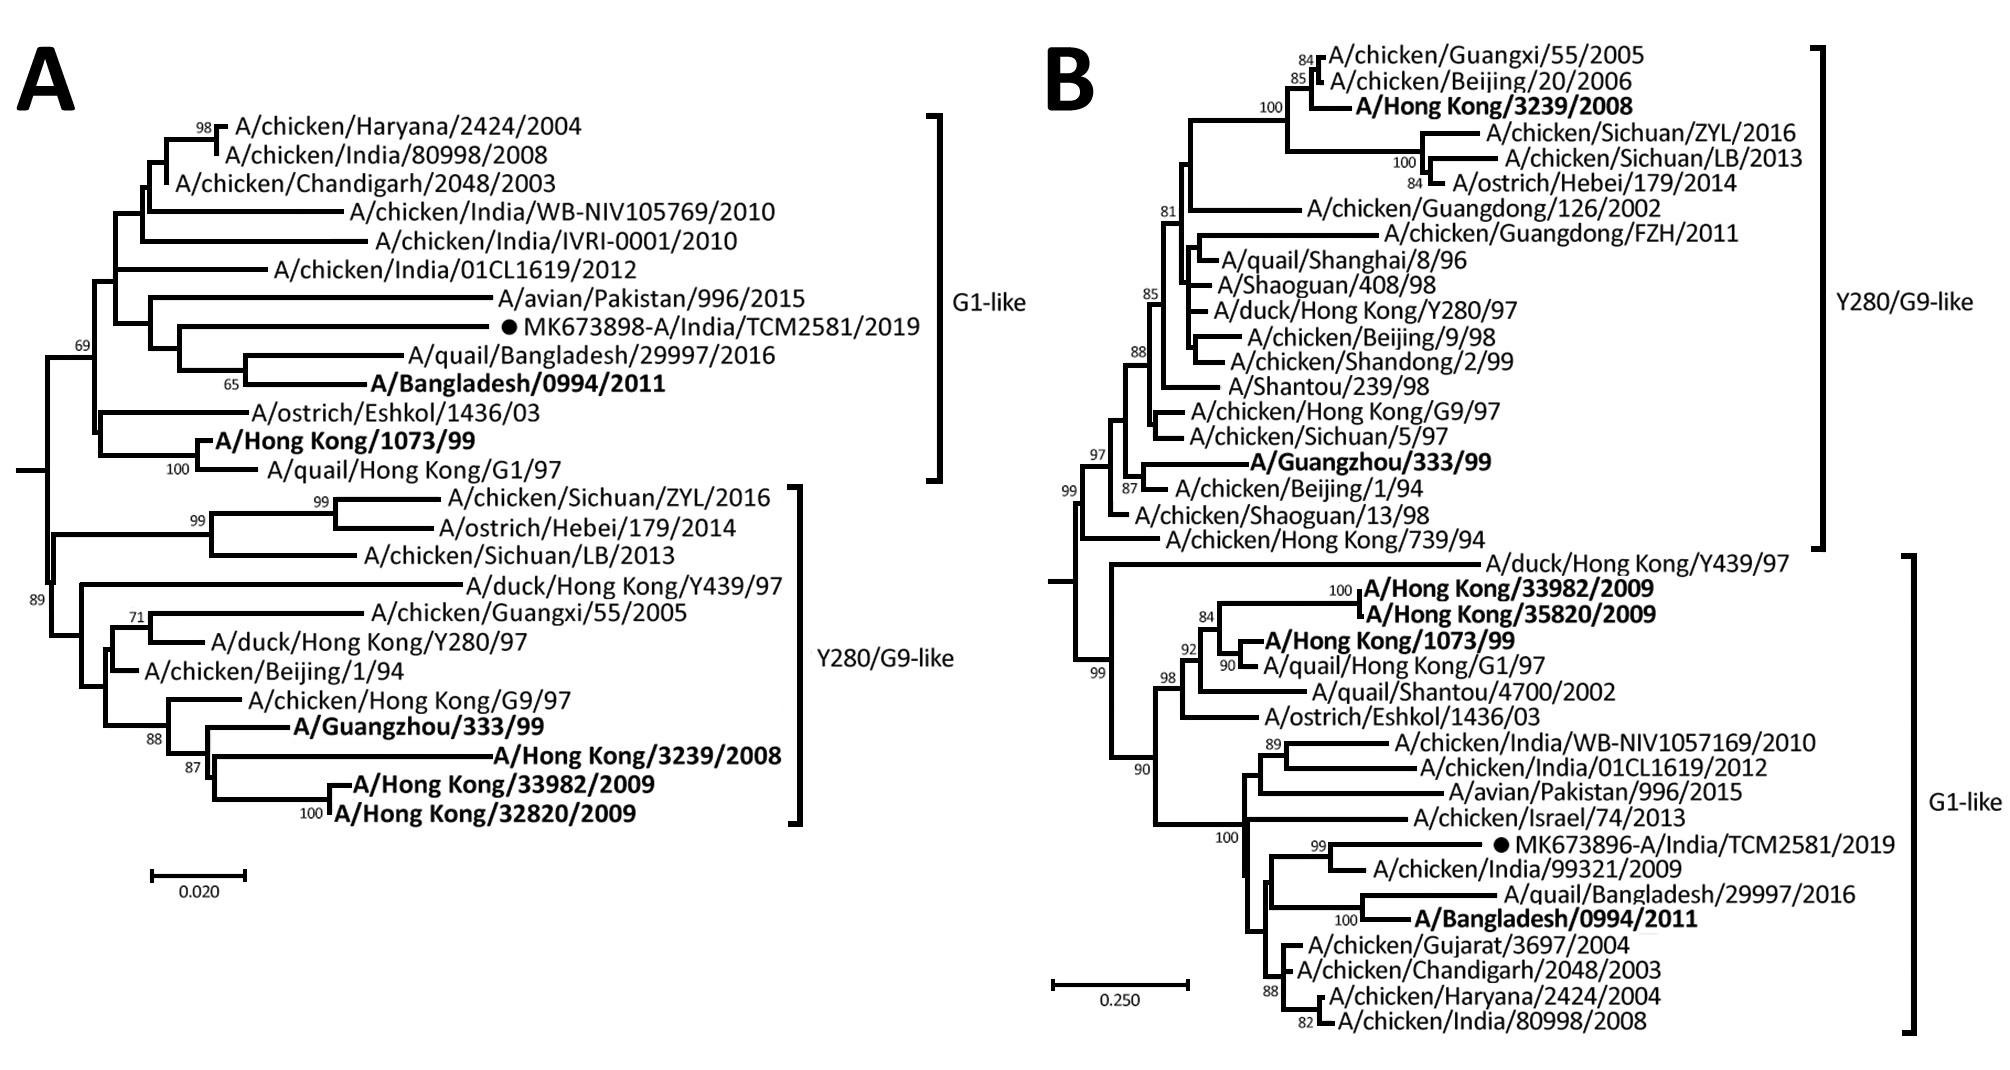 Phylogenetic tree of hemagglutinin gene (A) and neuraminidase gene (B) gene of influenza virus A/India/TCM 2581/2019(H9N2) from India (black circle) and reference strains. The numbers above the branches are the bootstrap probabilities (%) for each branch, determined by using the MEGA 7.0 (https://megasoftware.net). Human cases from other countries are in bold. Scale bars indicate substitutions per site.